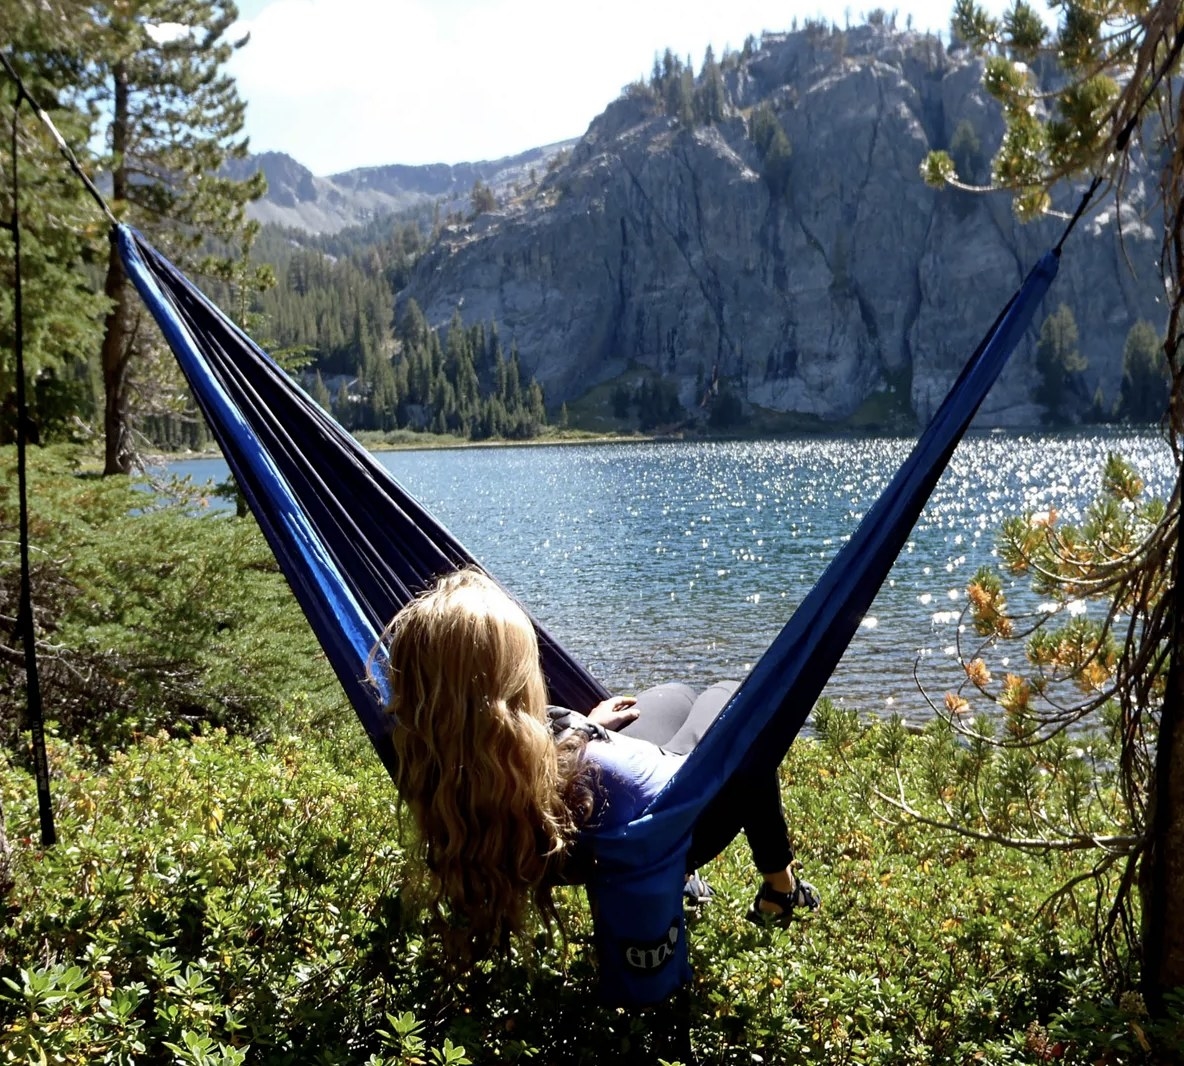 A person lounging on a hammock